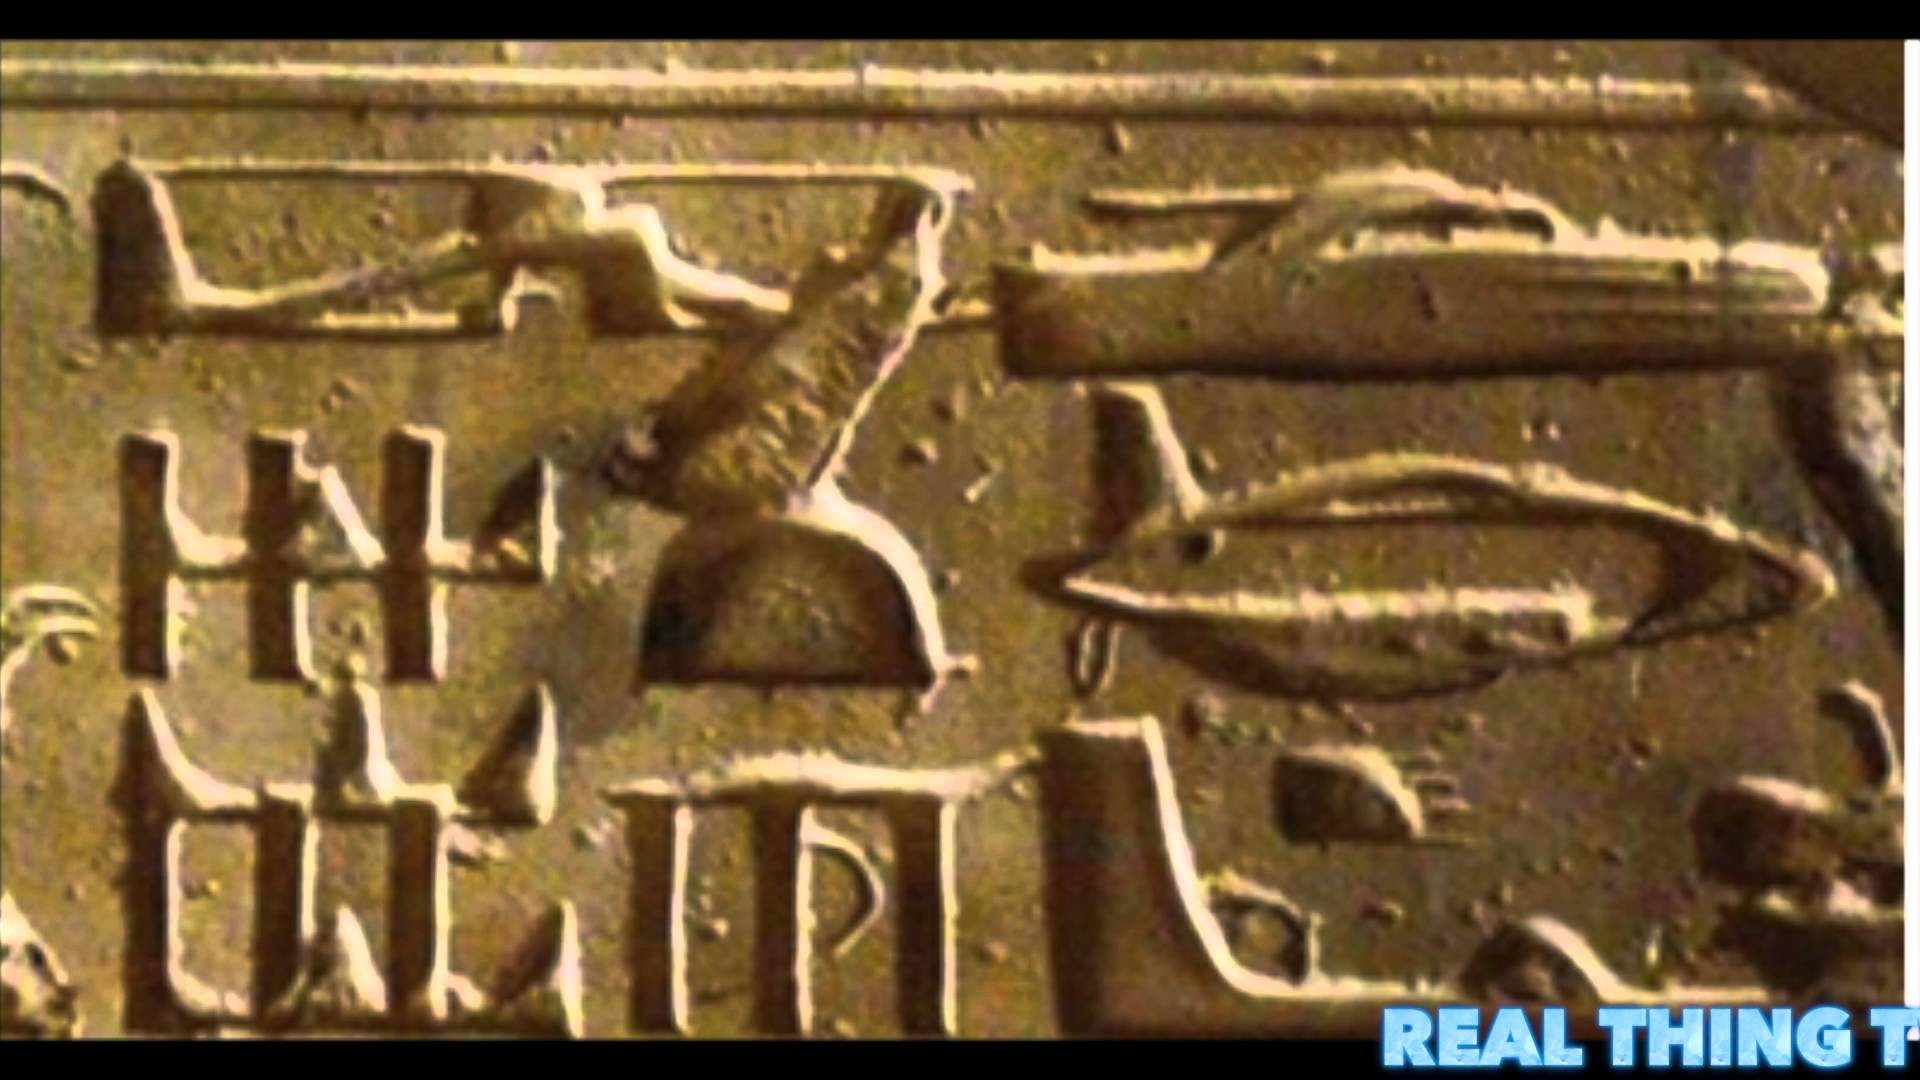 1920x1080 Riddle of planes and helicopter found in Egyptian hieroglyphs - YouTube